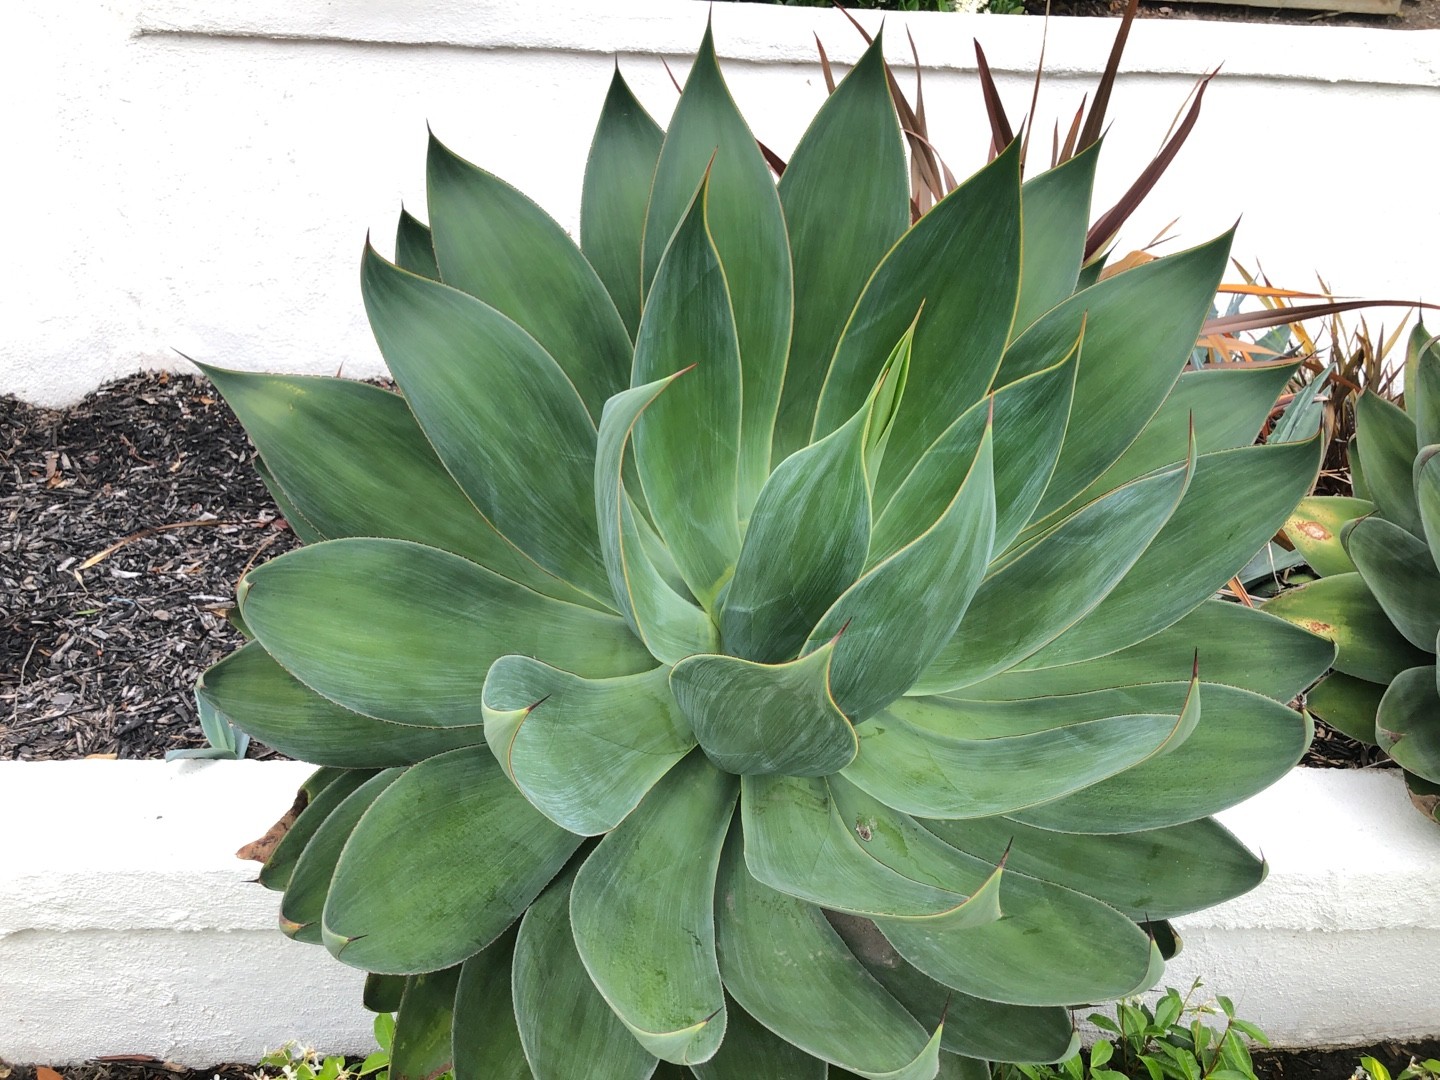 Agave 'Blue Flame'のお世話ガイド 育て方 育て方（潅水, 施肥, 剪定, 病気）- PictureThis